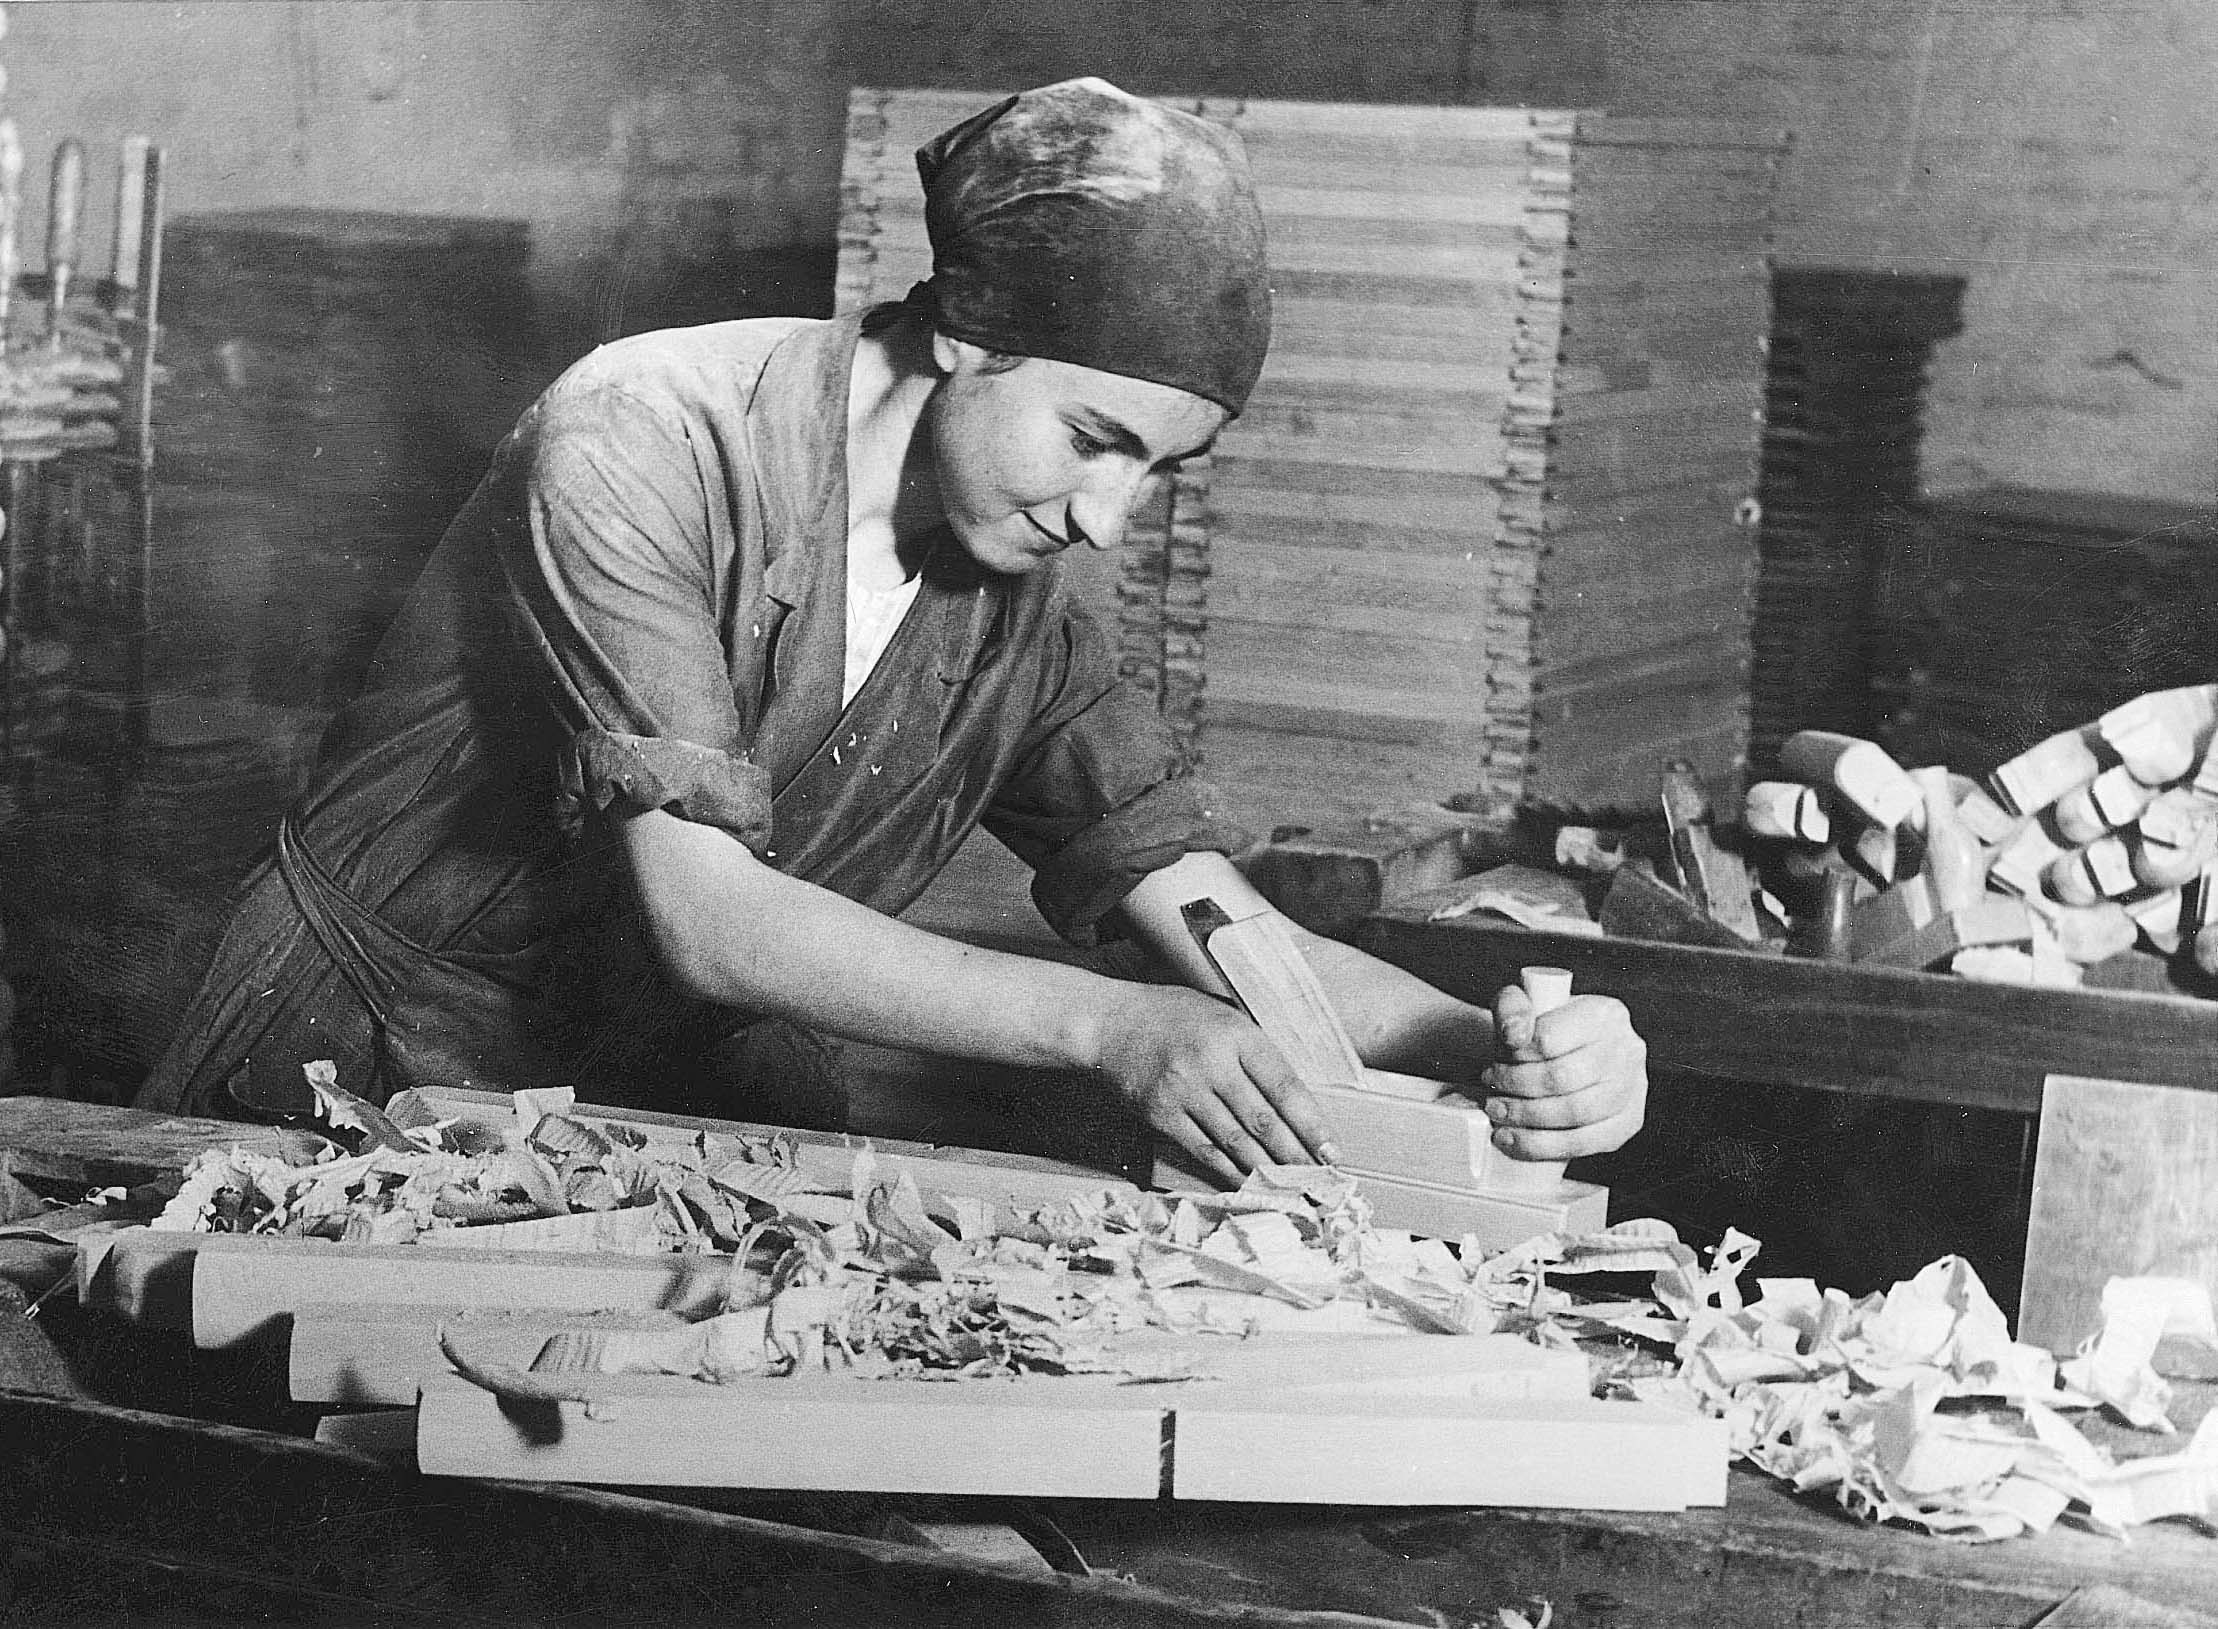 A DP camp resident working in carpentry – Stettin, Germany